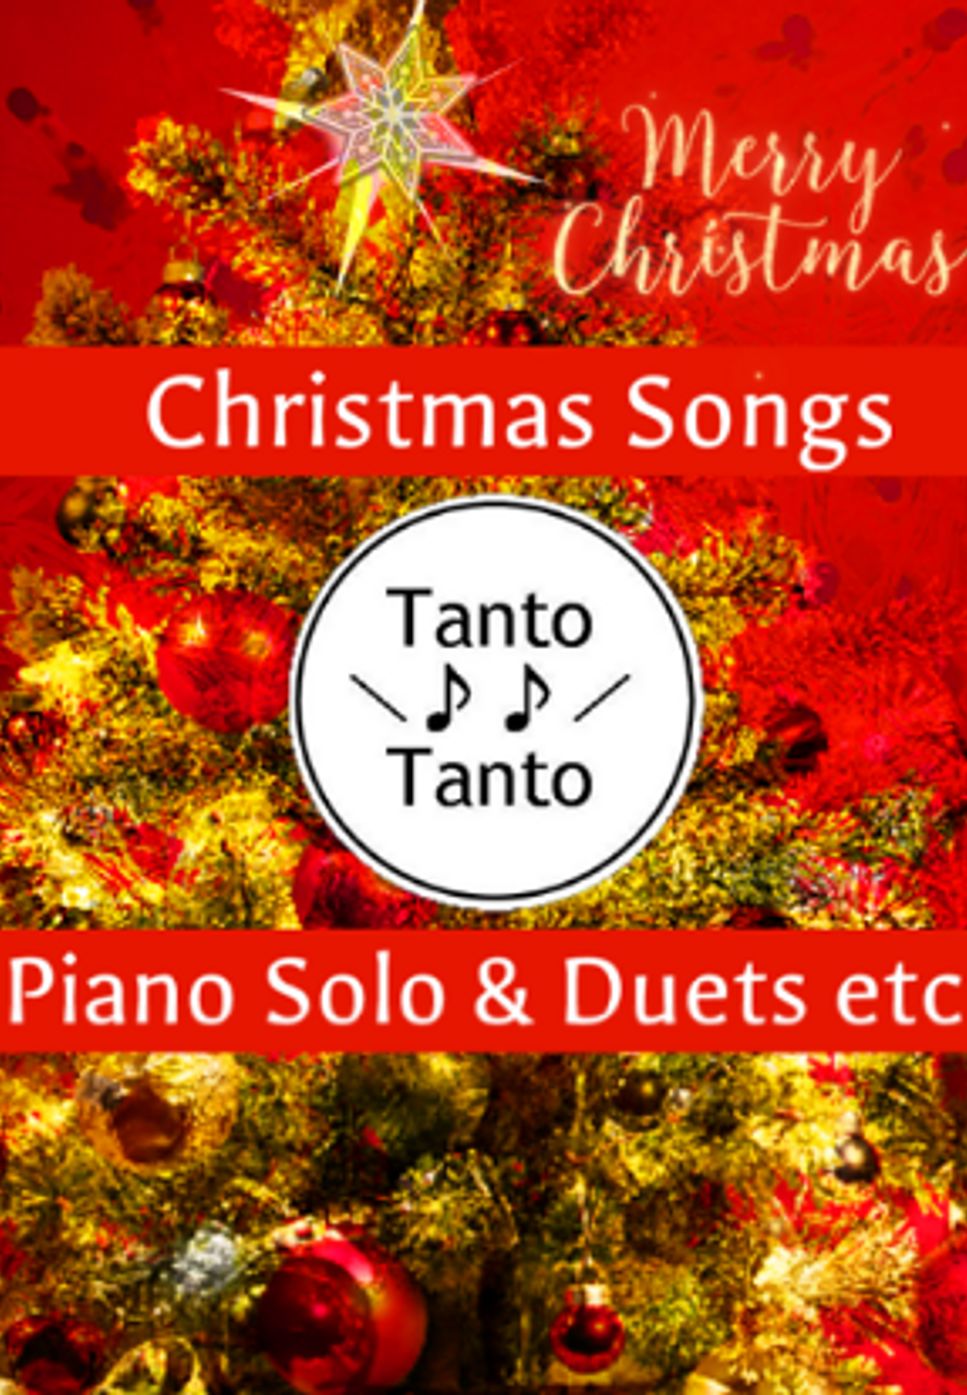 We Wish You A Merry Christmas (Dance Music ☆☆ Piano Solo in G) by Tanto Tanto